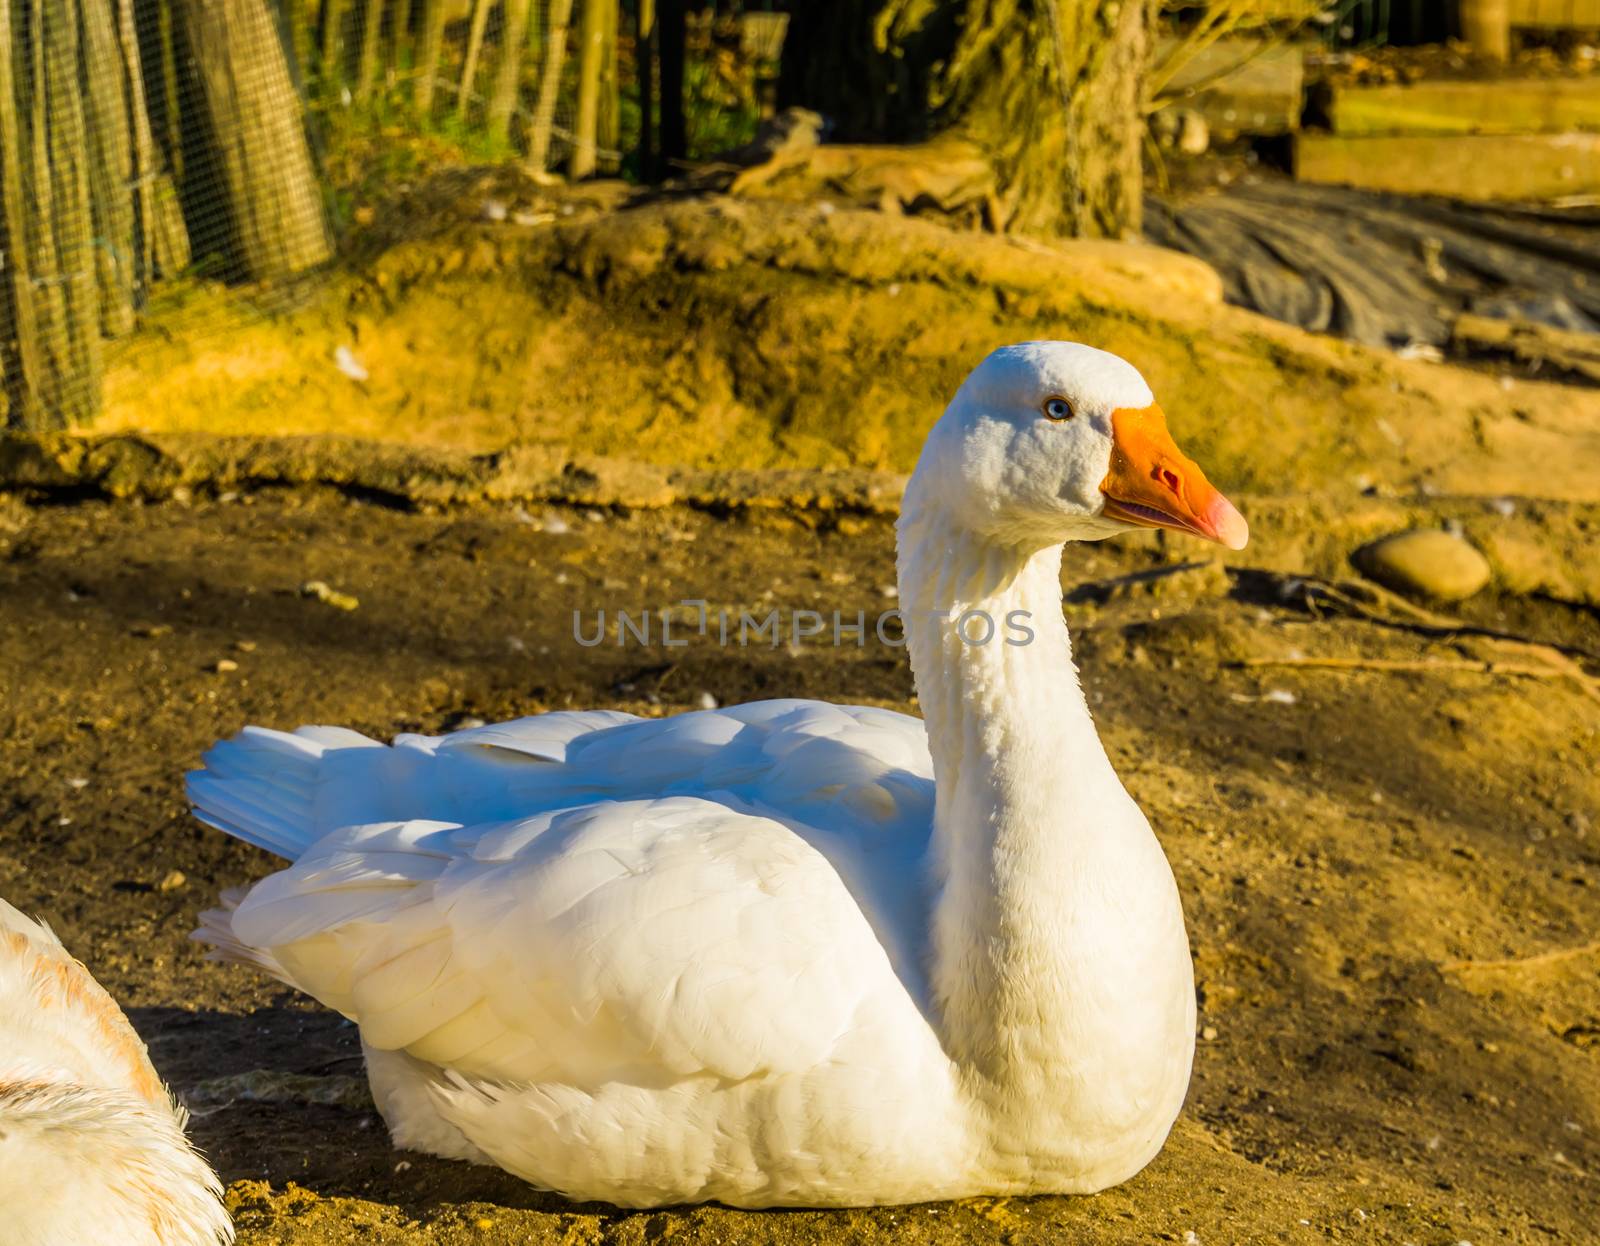 beautiful portrait of a white domestic goose, popular farm animal, aggressive poultry specie from the Netherlands by charlottebleijenberg